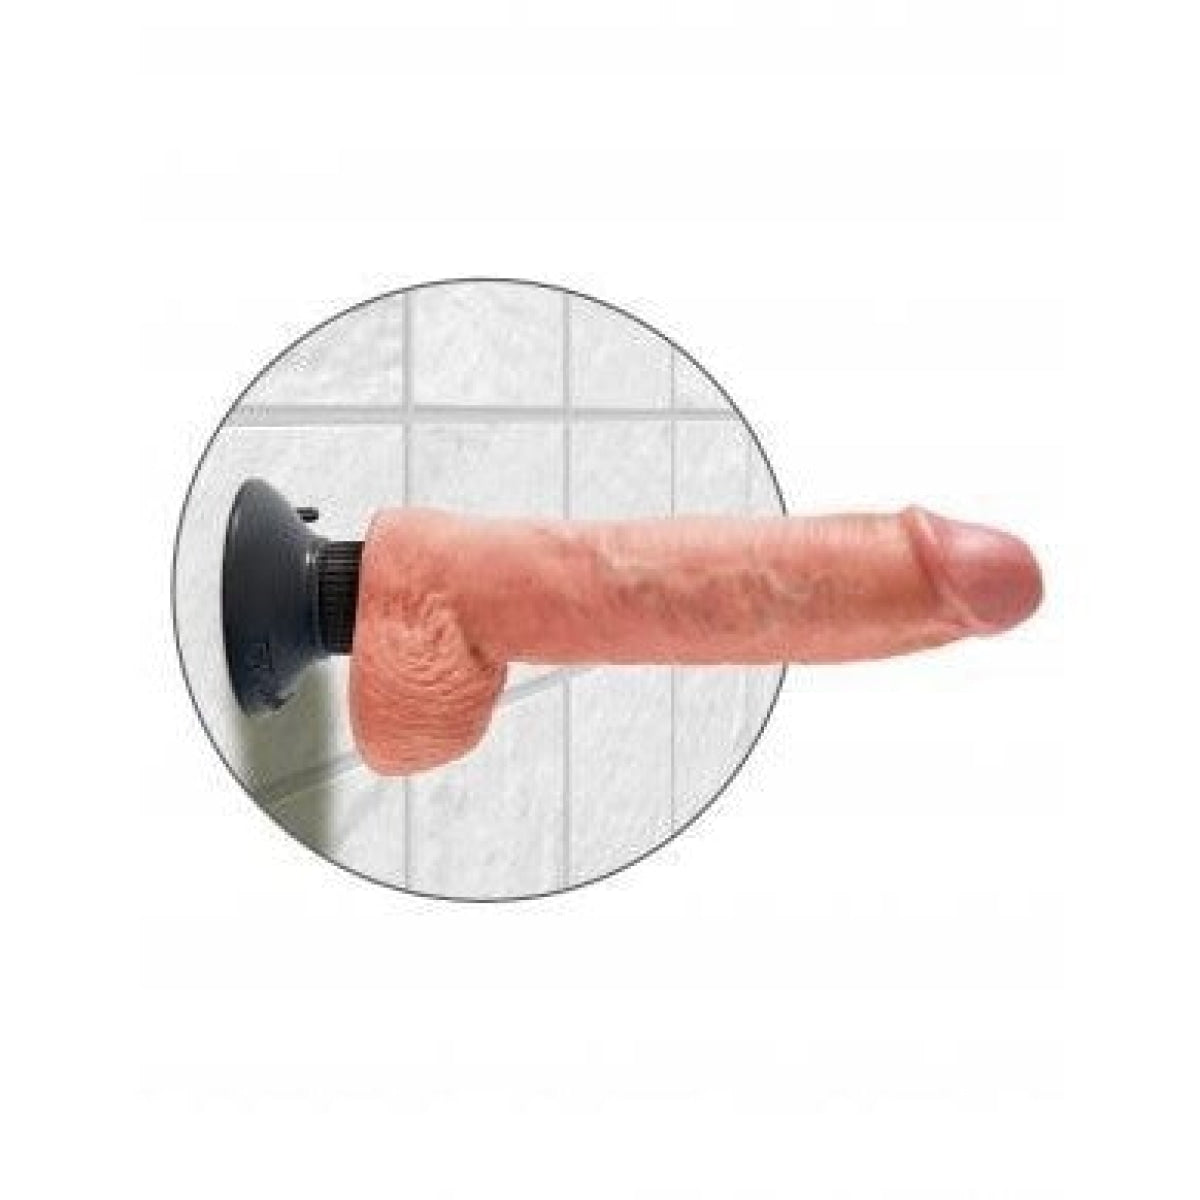 King Cock 10 In Cock W-balls Flesh Vibrating Intimates Adult Boutique